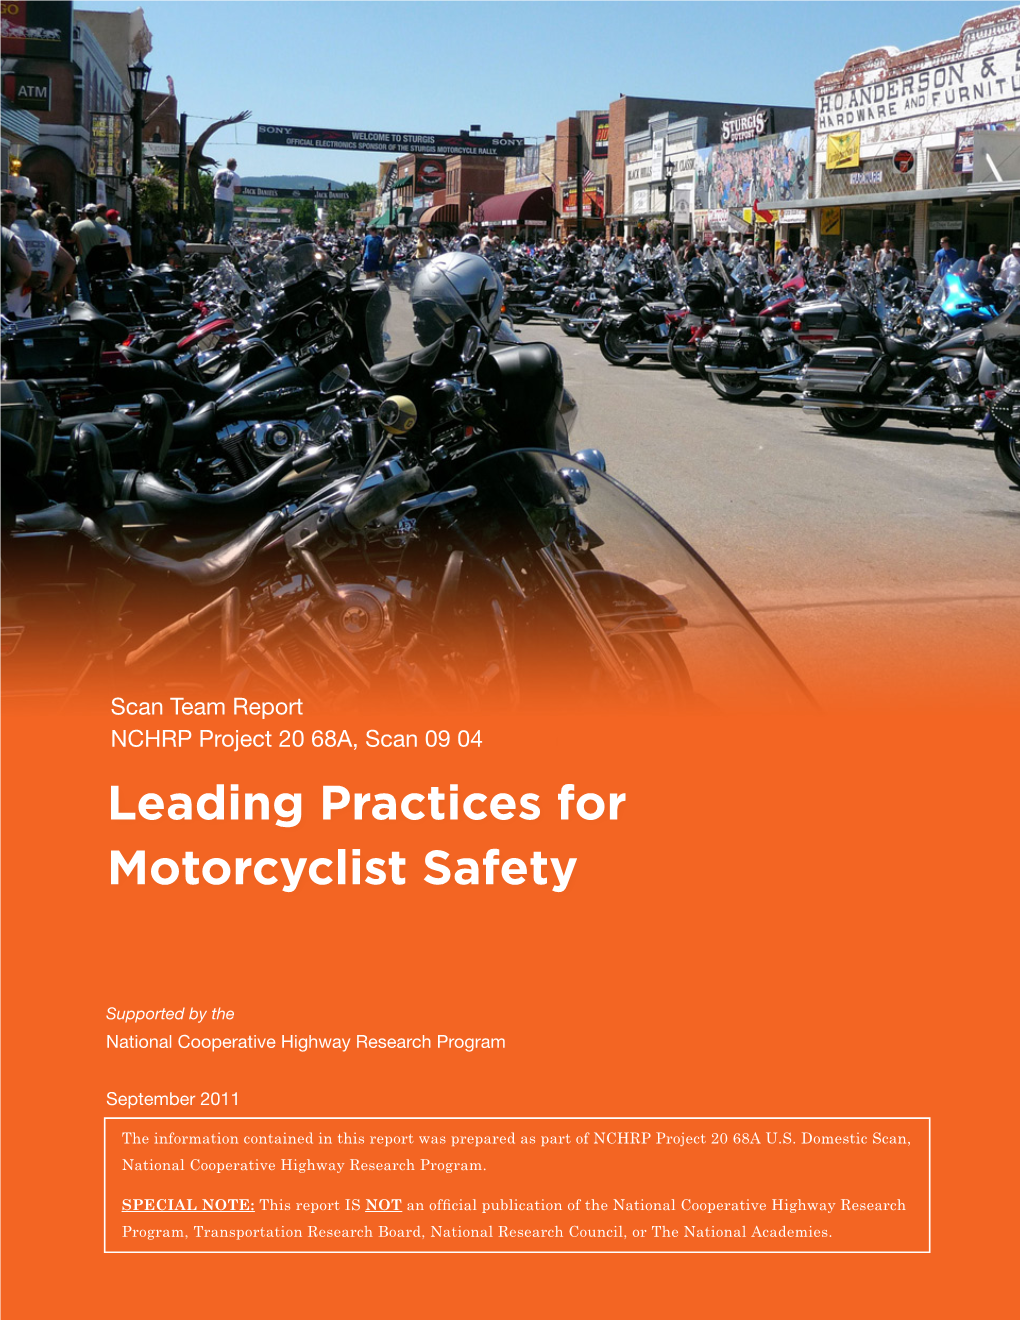 Leading Practices for Motorcyclist Safety